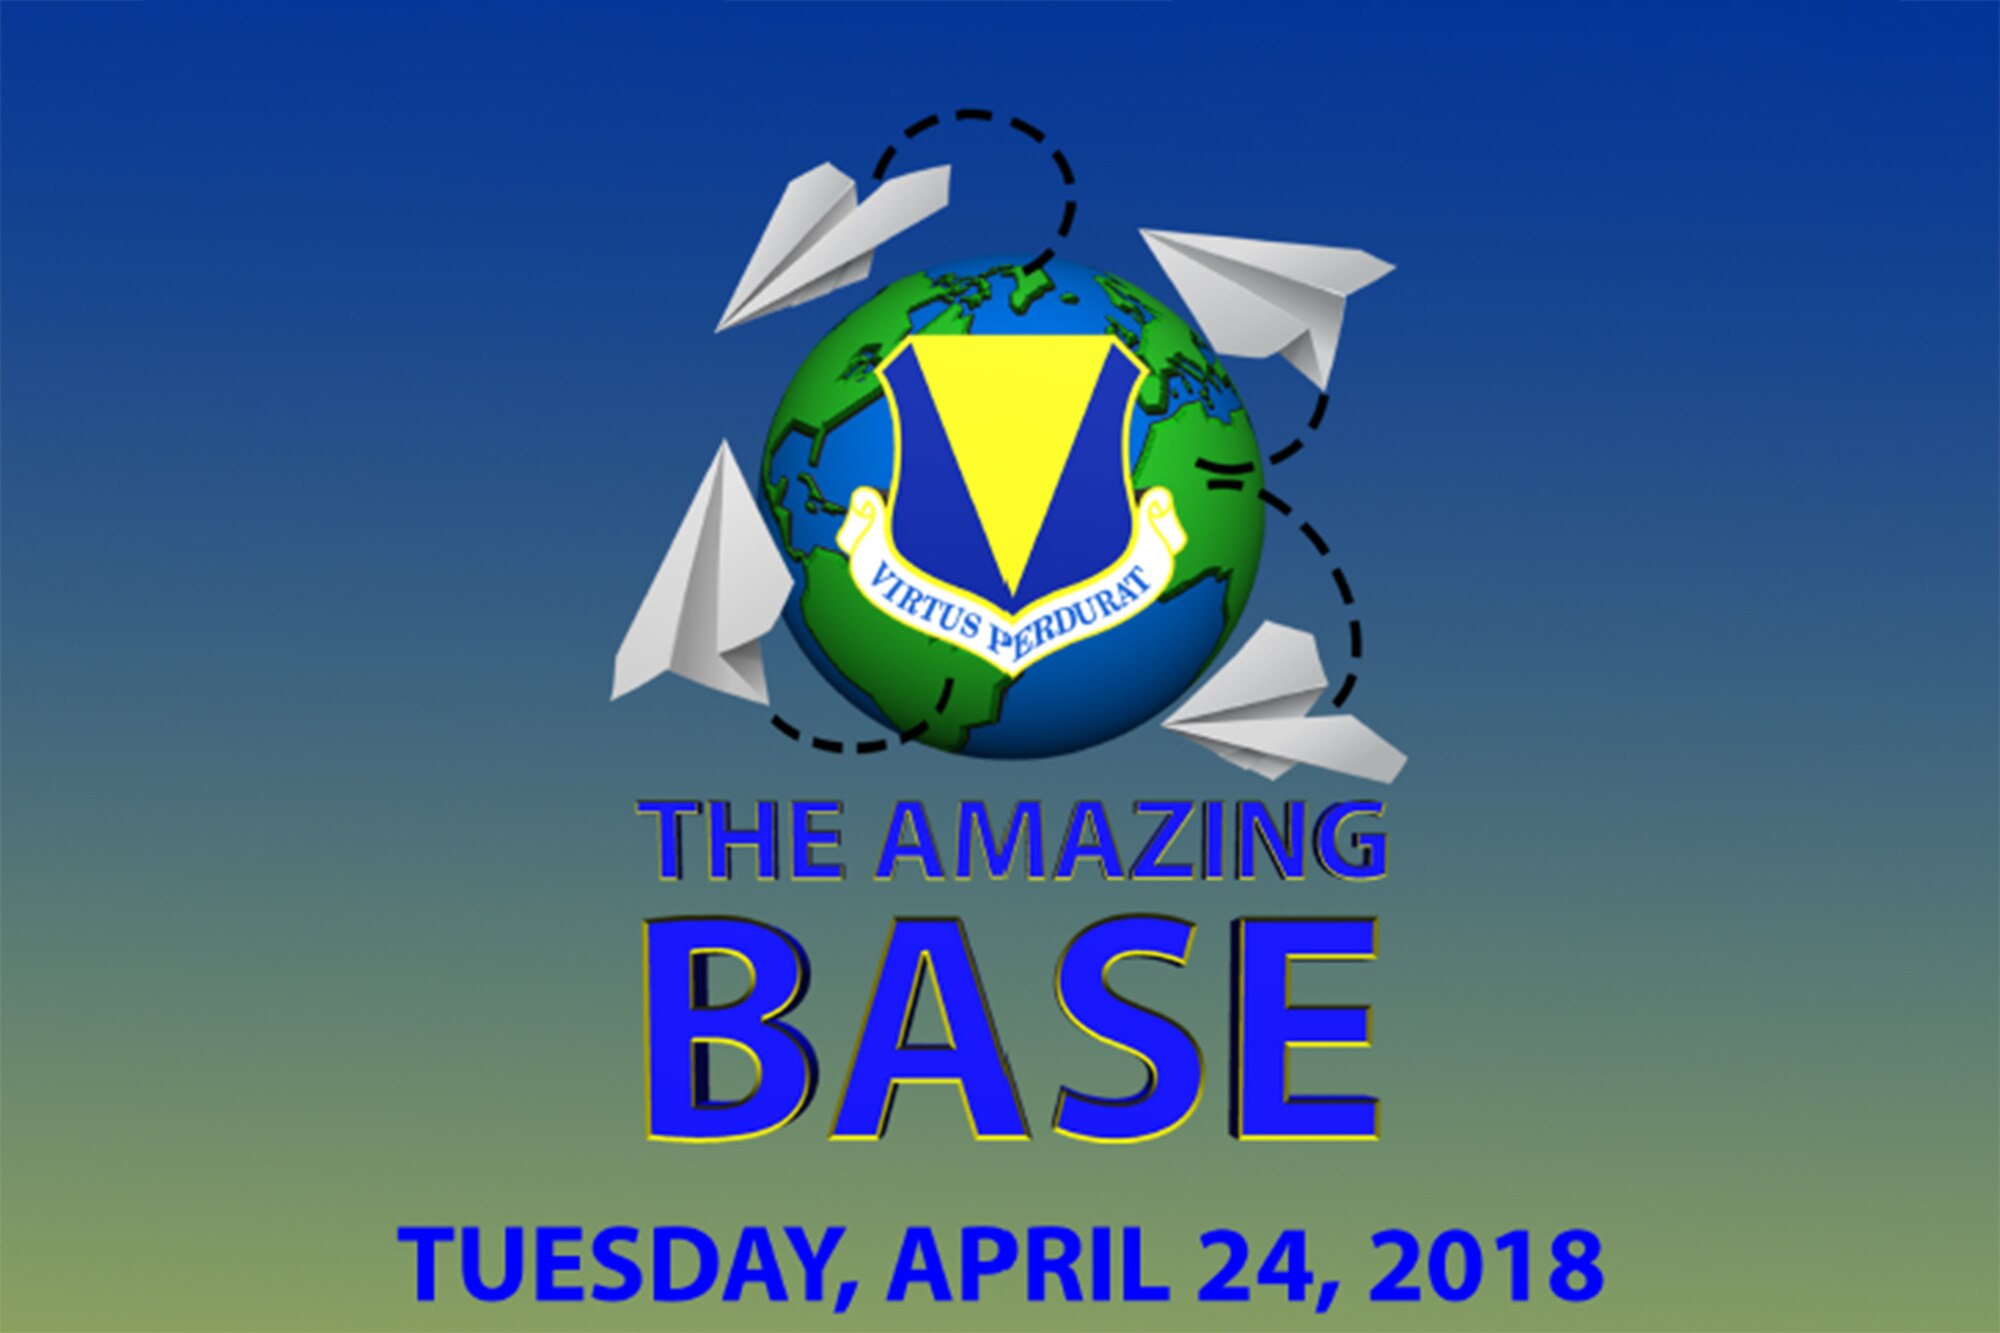 Advertisement for The Amazing Base event